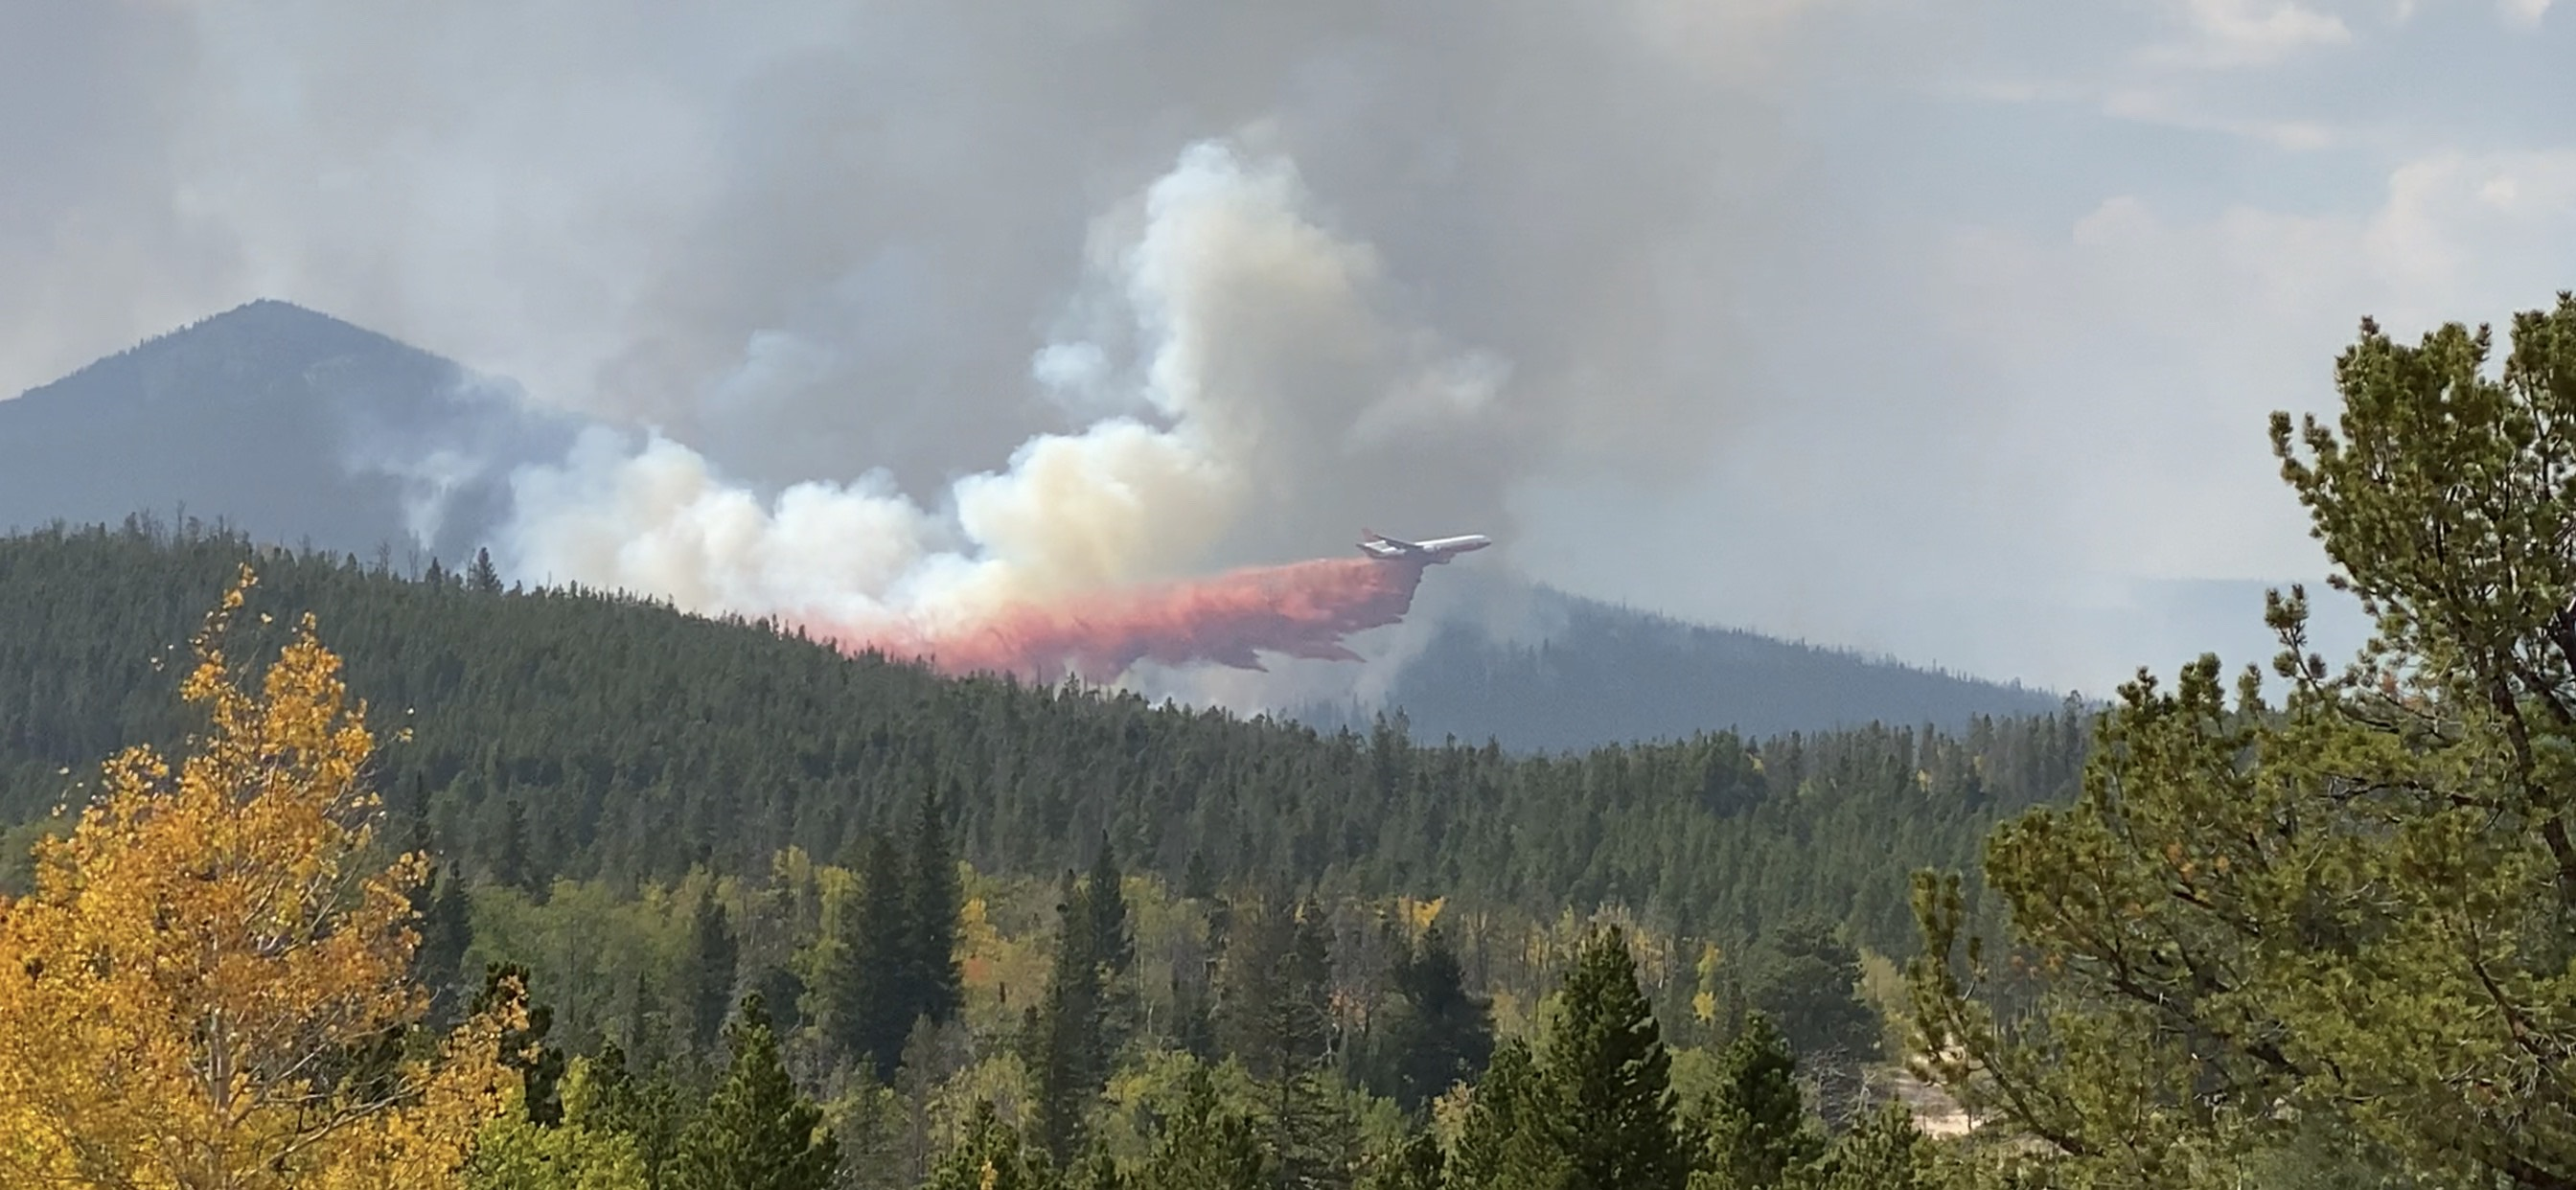 Firefighters Battle COVID-19 Along With Wildfires